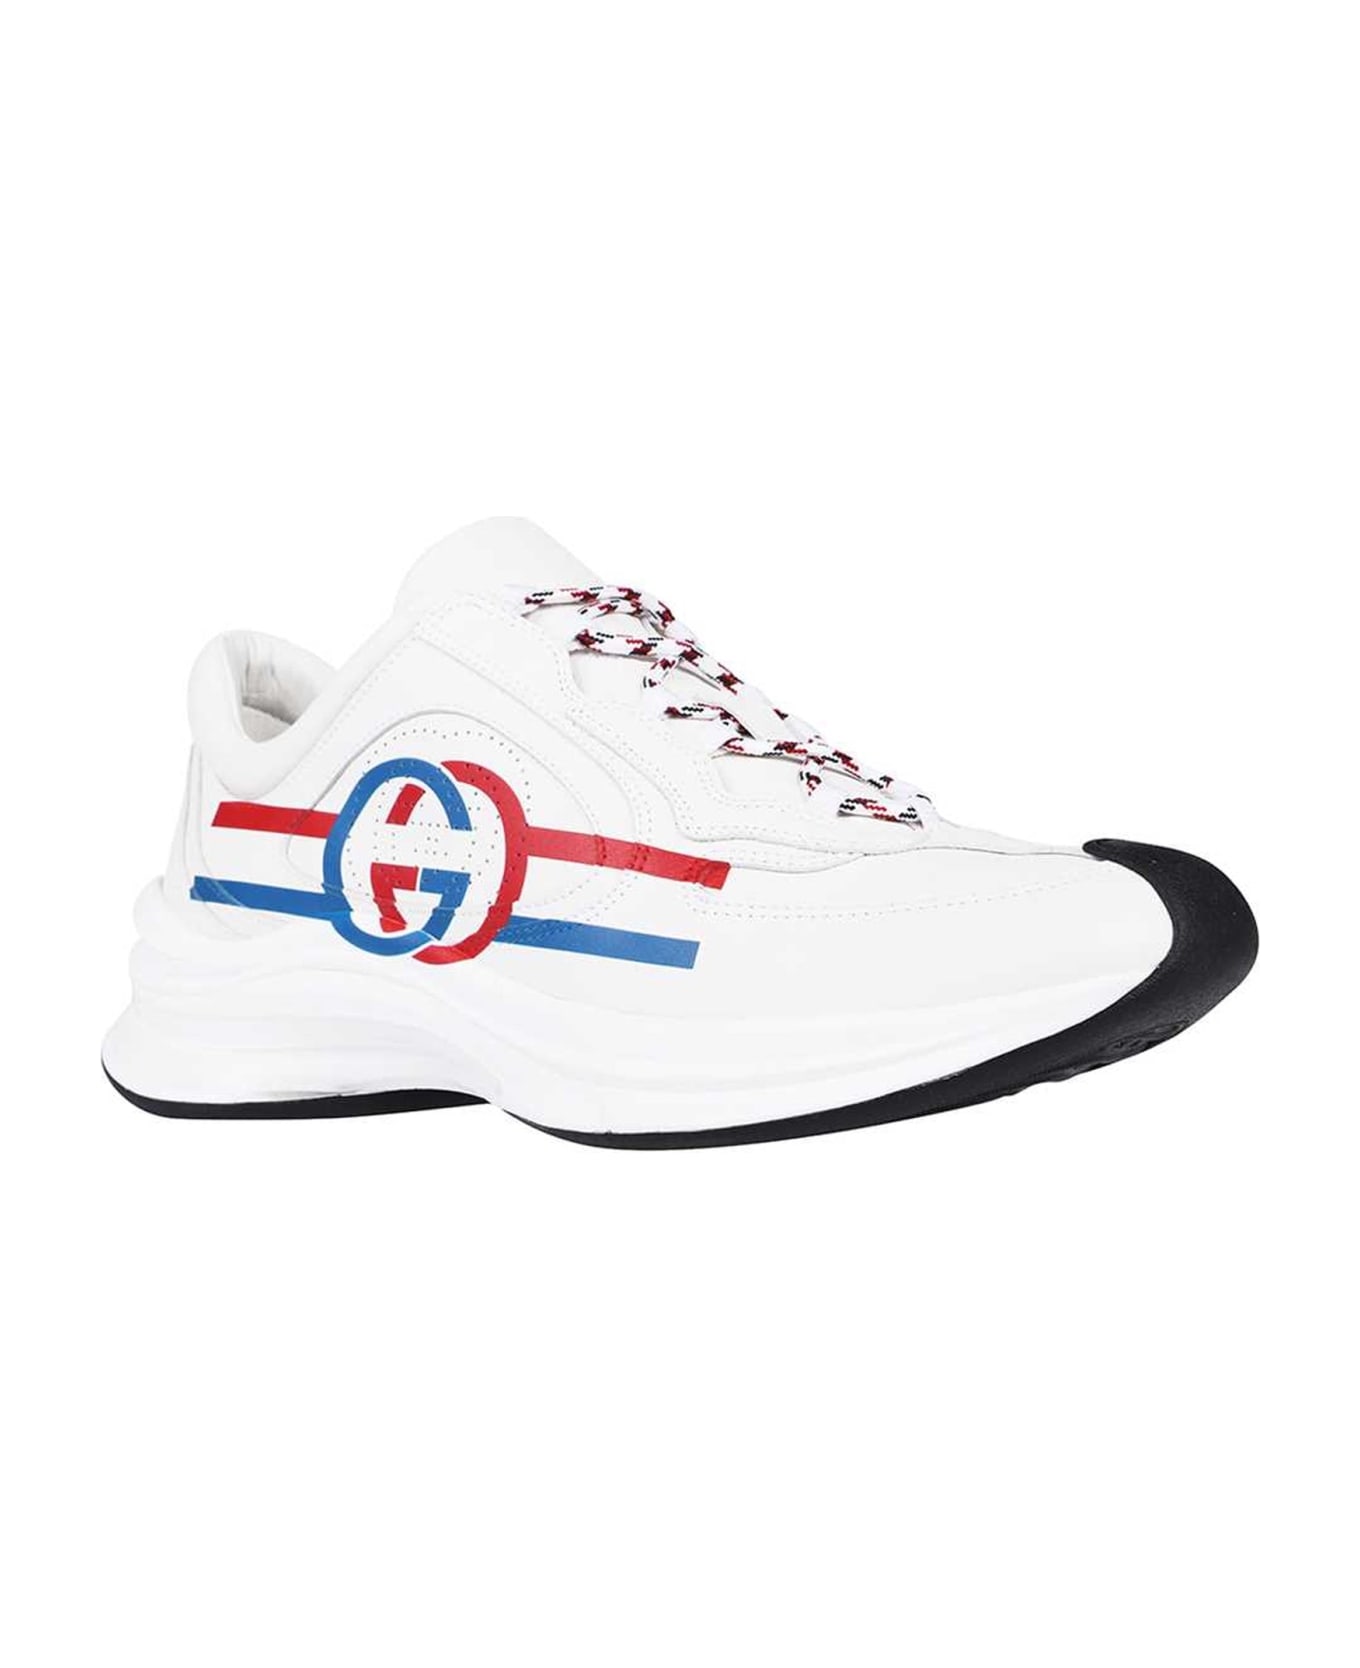 Gucci Run Leather Sneakers - White スニーカー